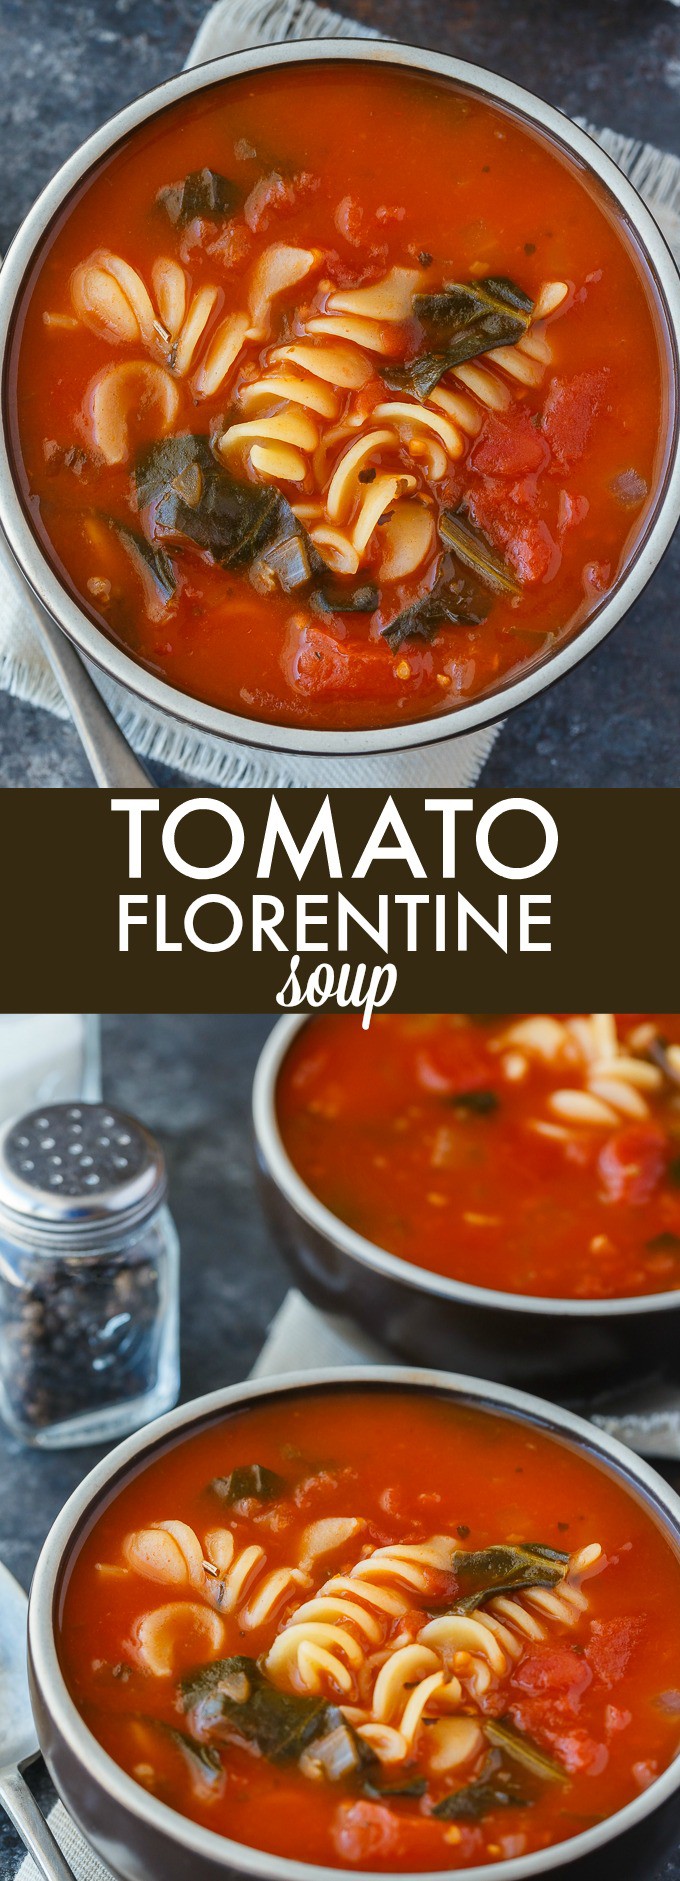 Tomato Florentine Soup - An easy soup recipe ready to eat in 20 minutes! It's full of delicious tomatoes, pasta and spinach.